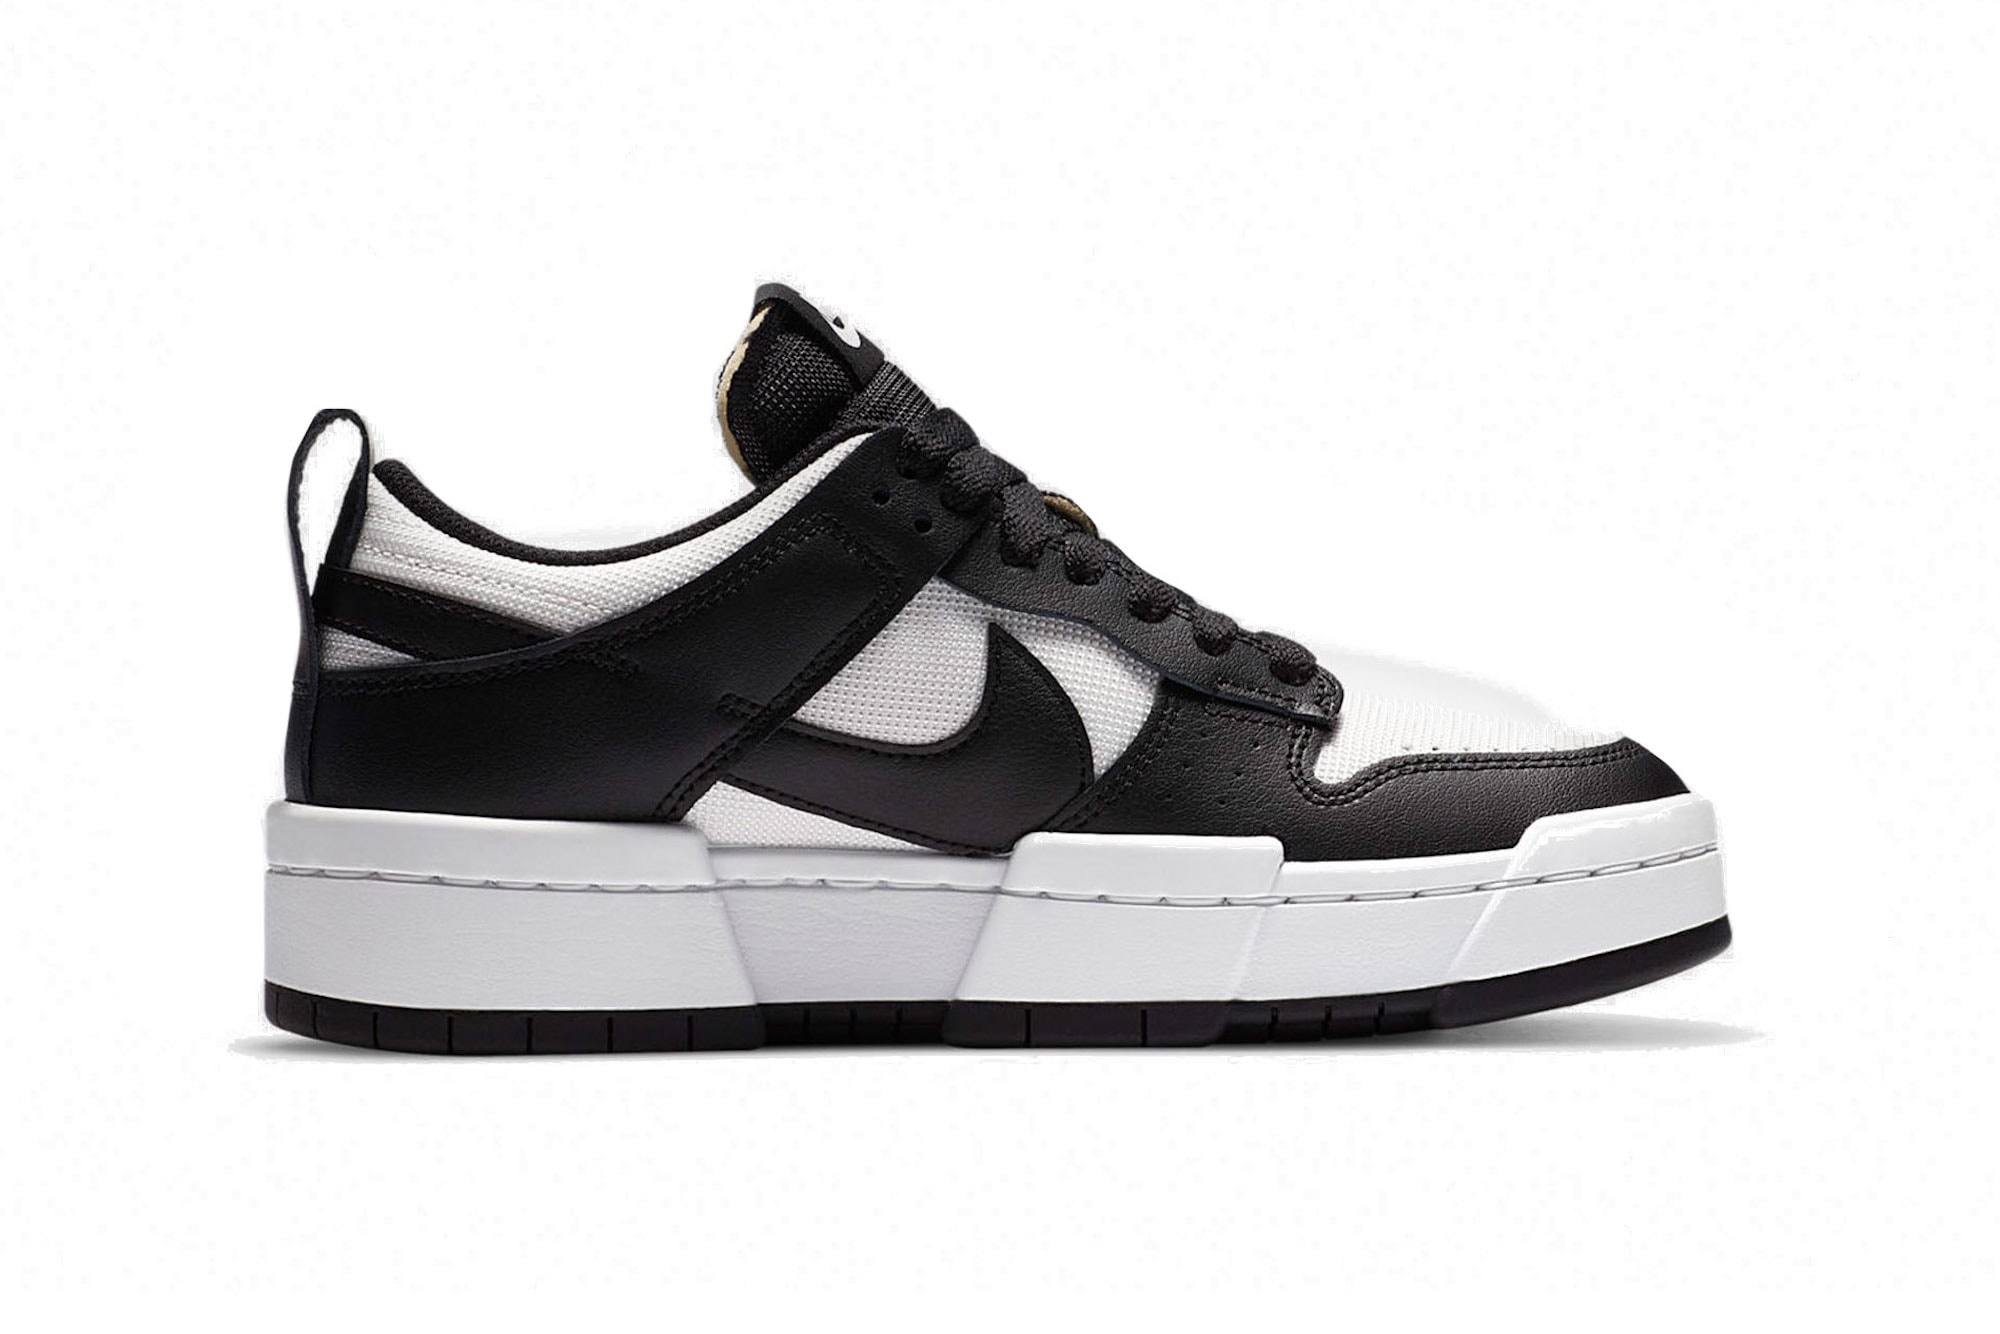 Nike Dunk Disrupt Black and White Release Shoe Sneaker Price